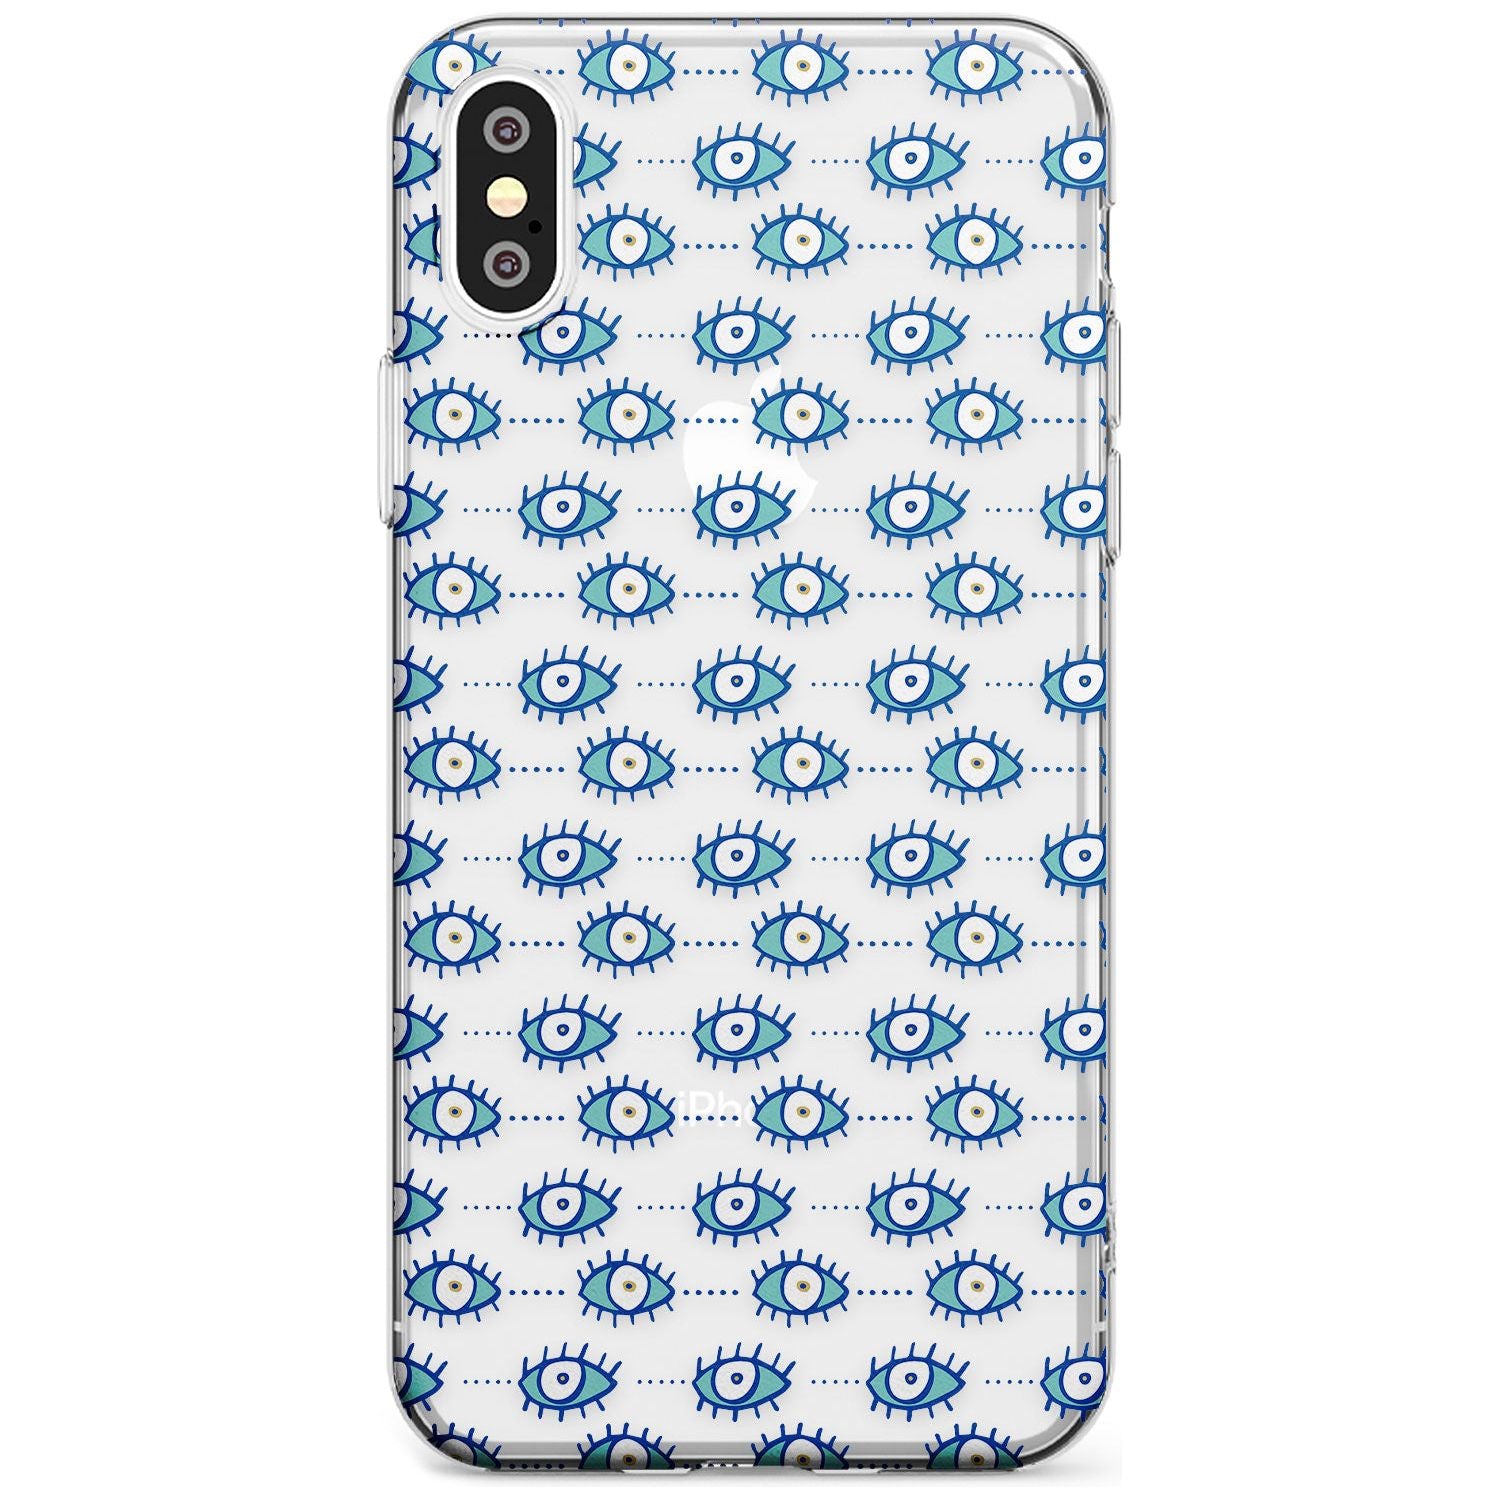 Crazy Eyes (Clear) Psychedelic Eyes Pattern Slim TPU Phone Case Warehouse X XS Max XR